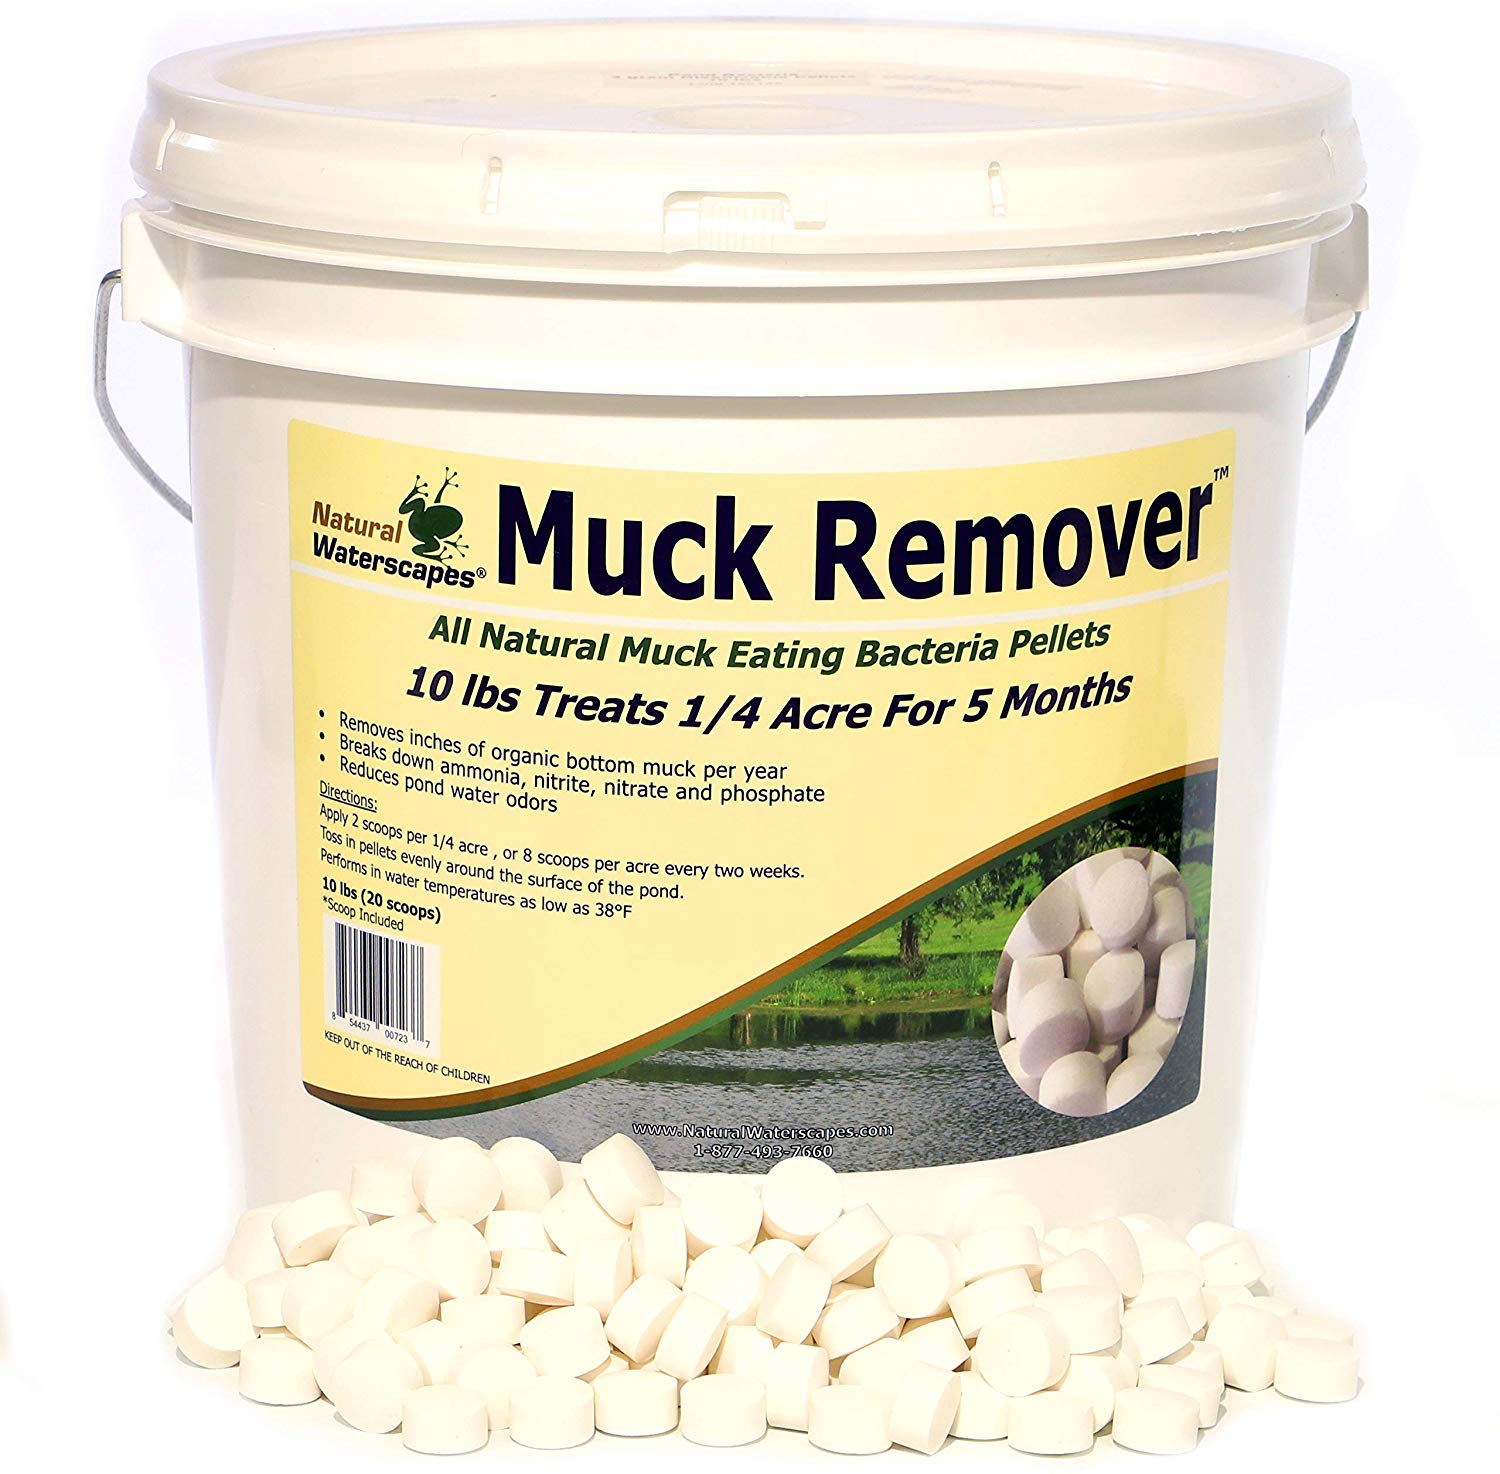 Natural Waterscapes Muck Remover Pellets